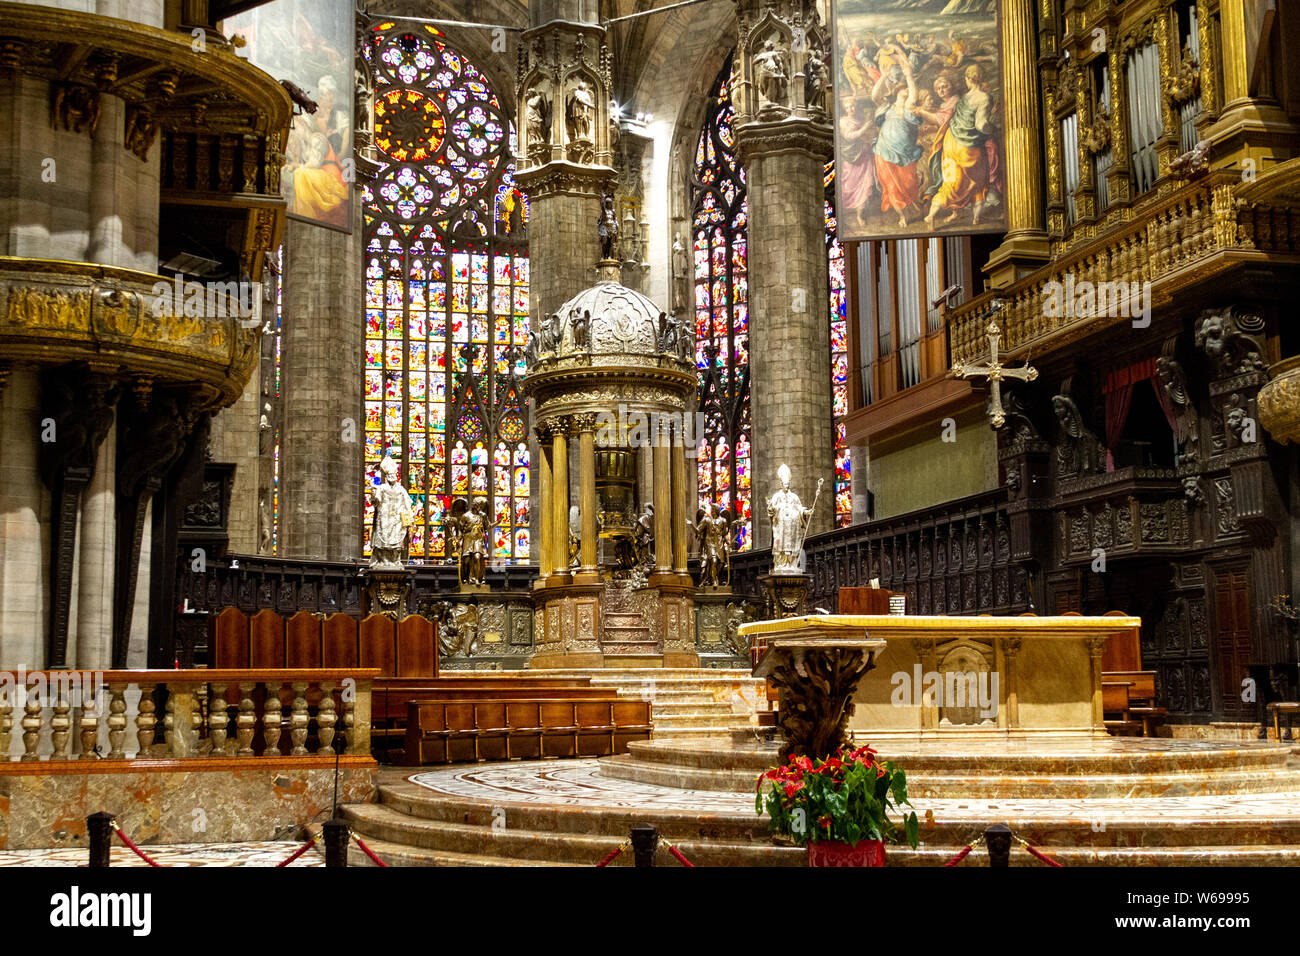 The altar with stained glass windows in the background. Duomo di Milano (Milan Cathedral). Stock Photo